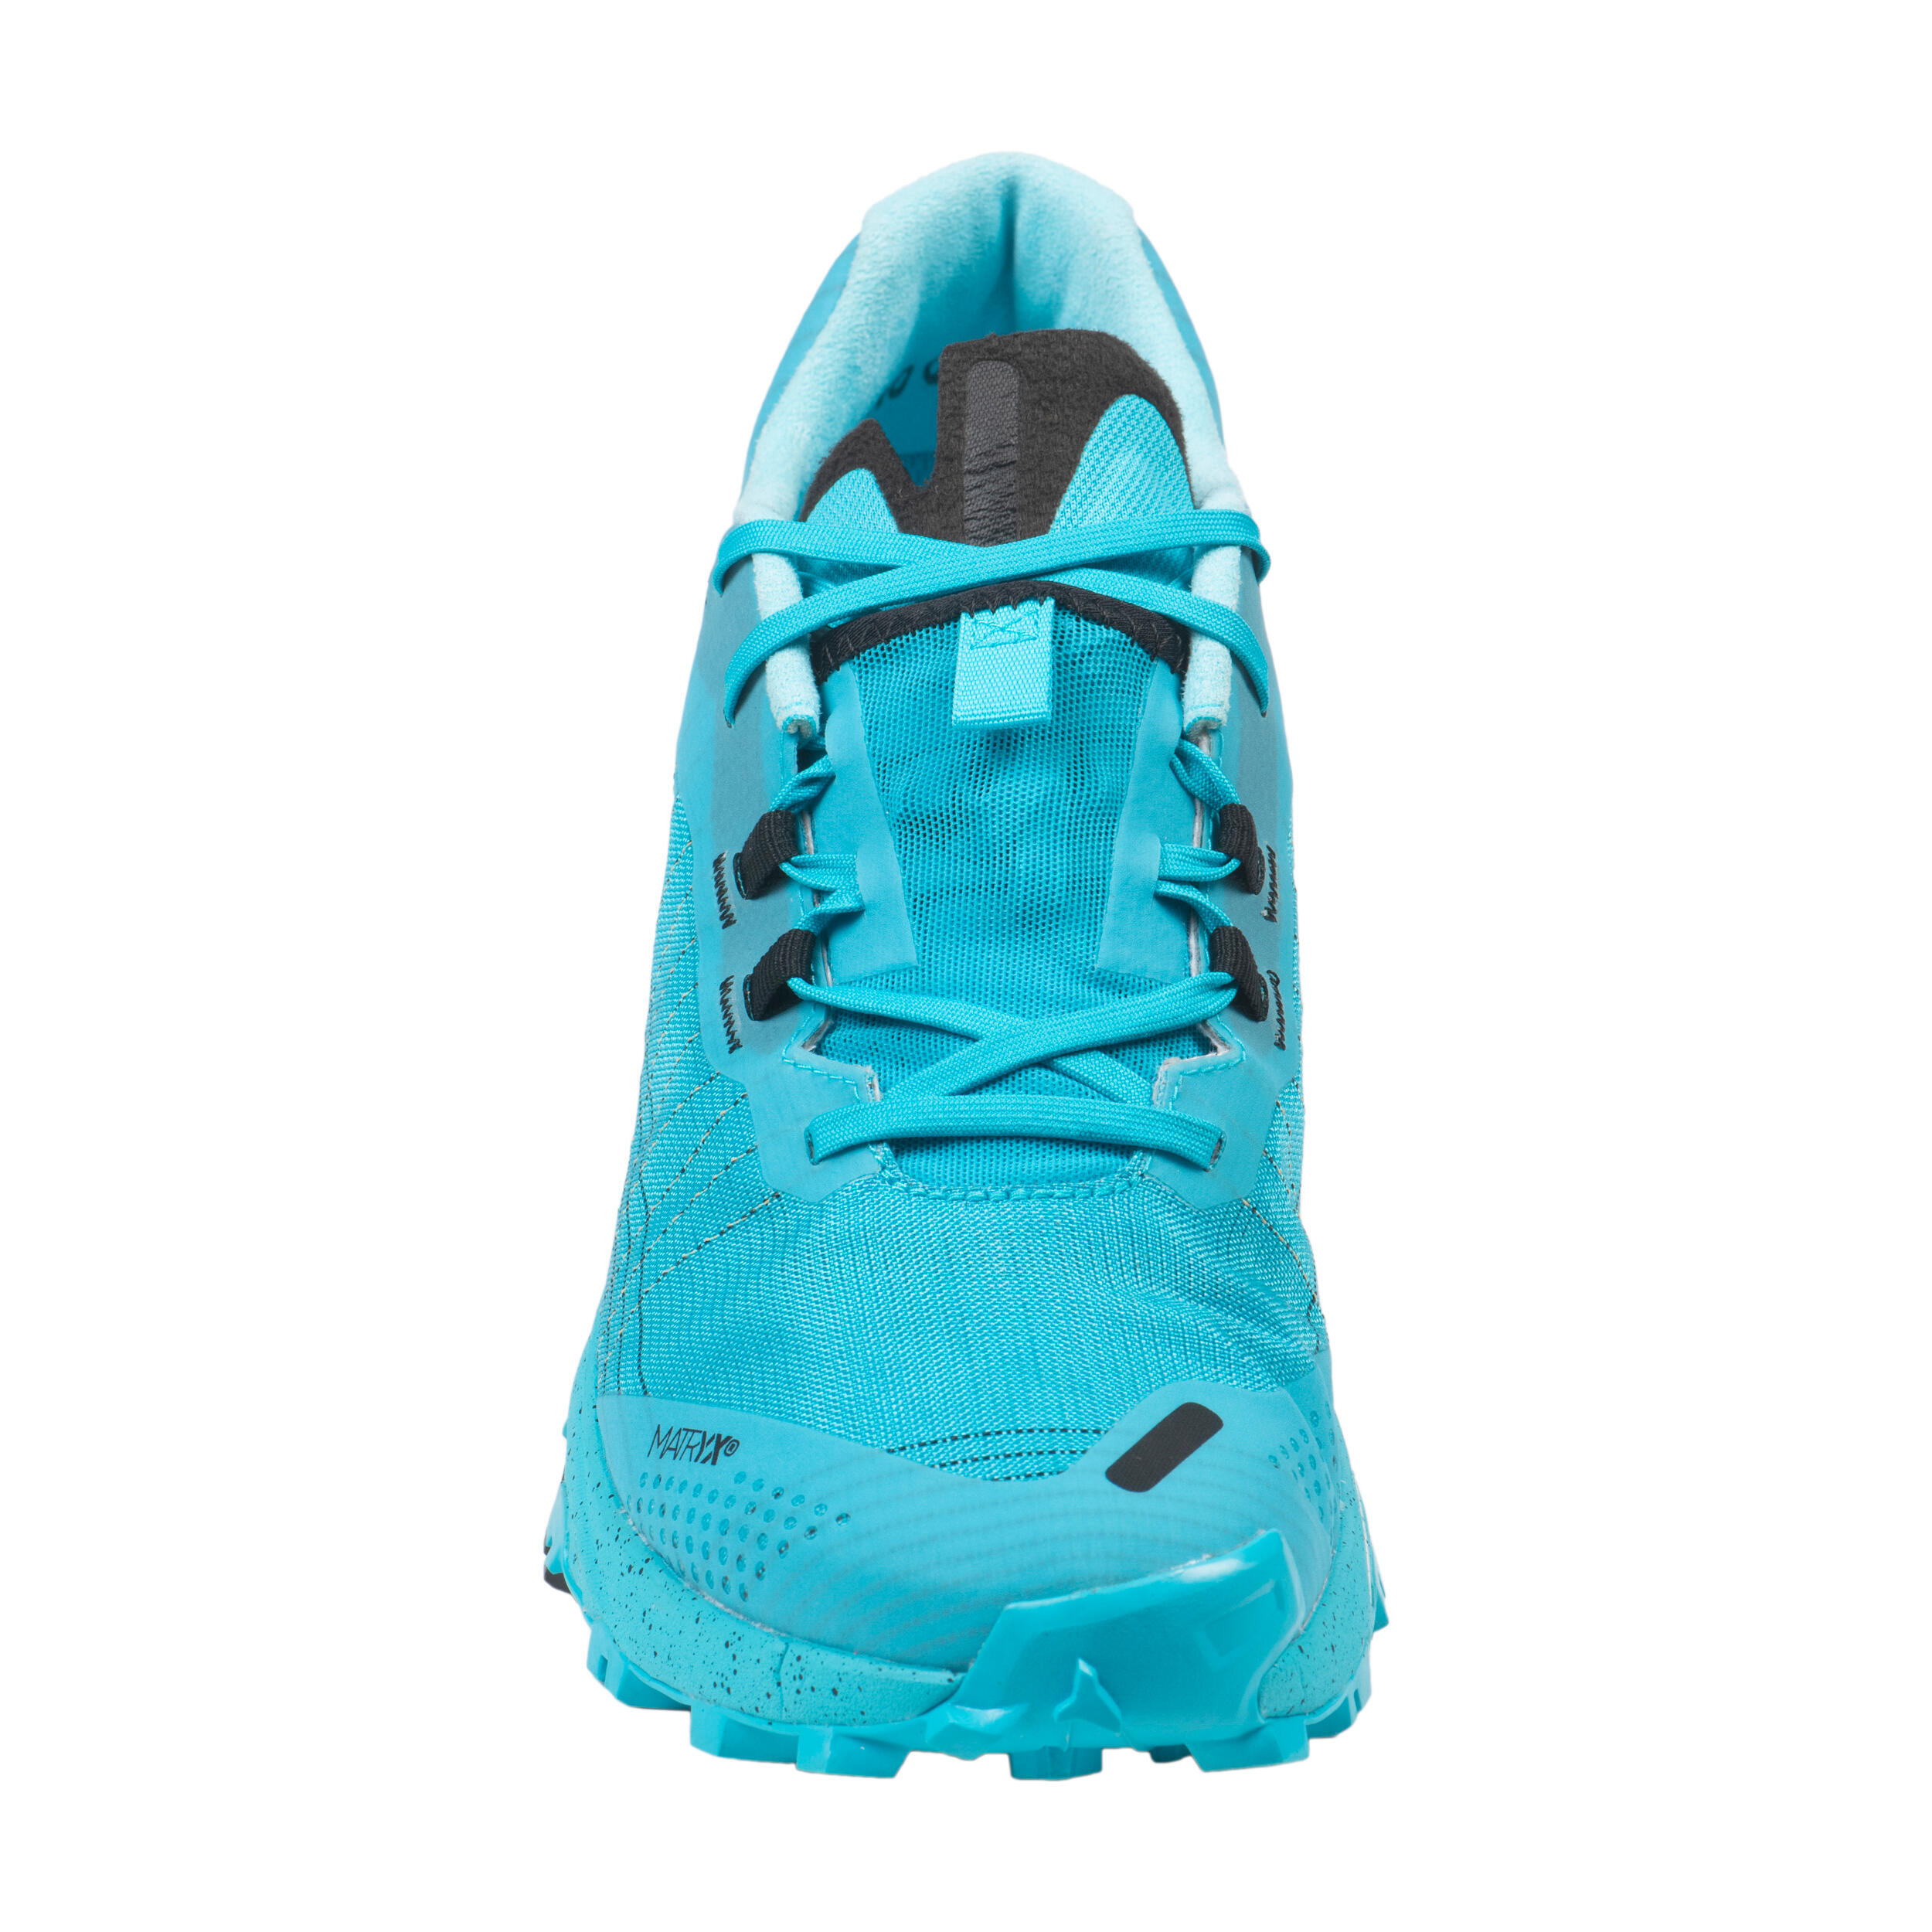 Race Light Men's Trail Running Shoes - sky blue and black 5/14